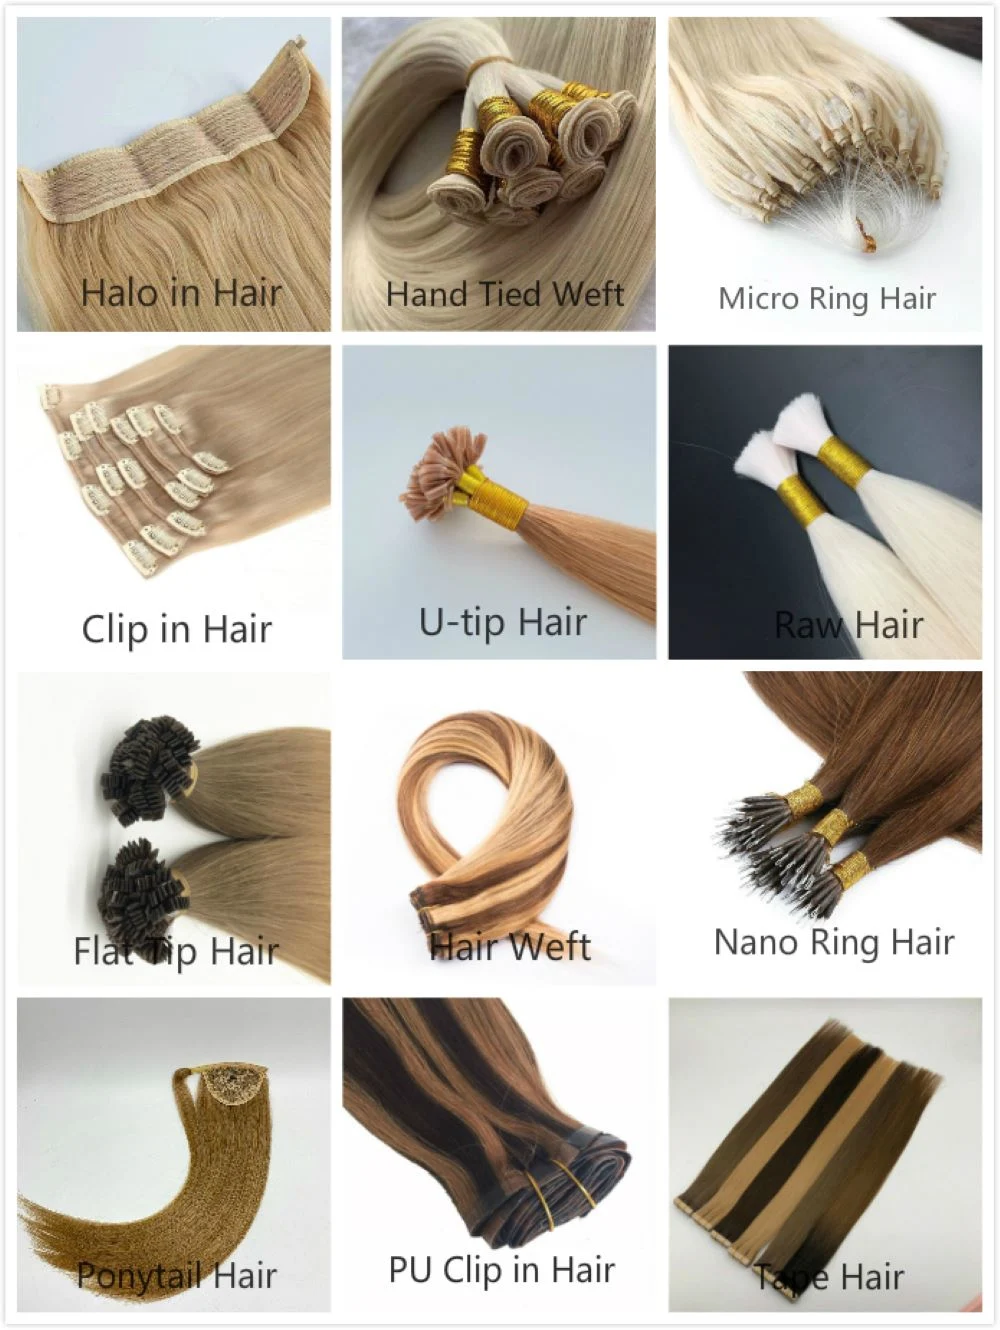 Clip in Human Hair Extensions Blonde Human Hair Clip in Extensions Remy Human Hair Clip in